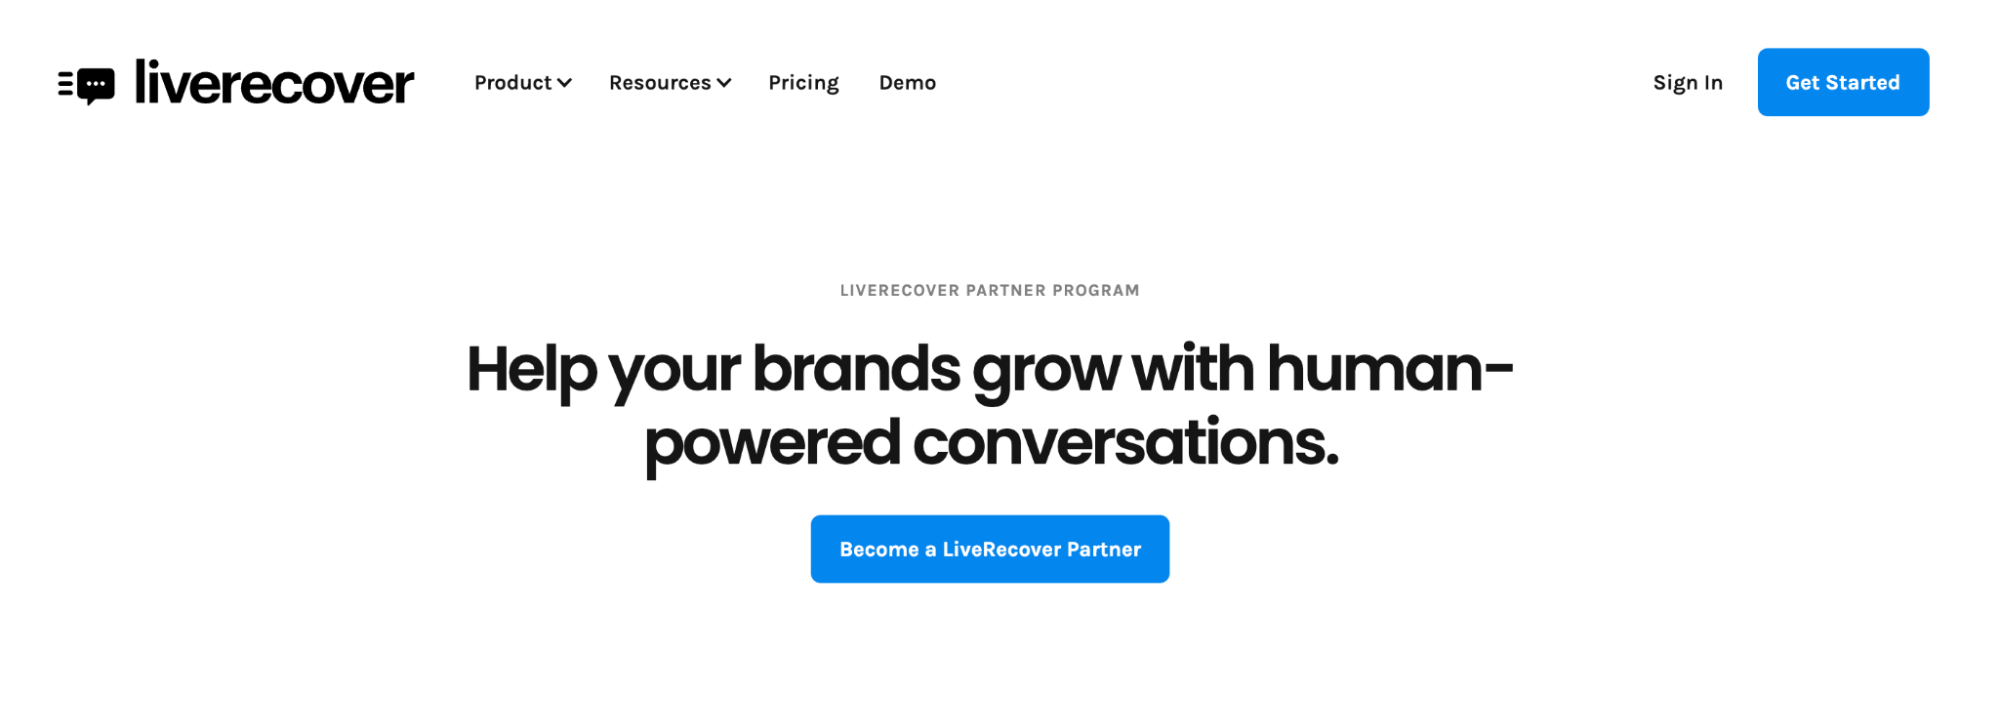 Screenshot of Live Recover’s website with the headline, “Help your brands grow with human-powered conversations.”